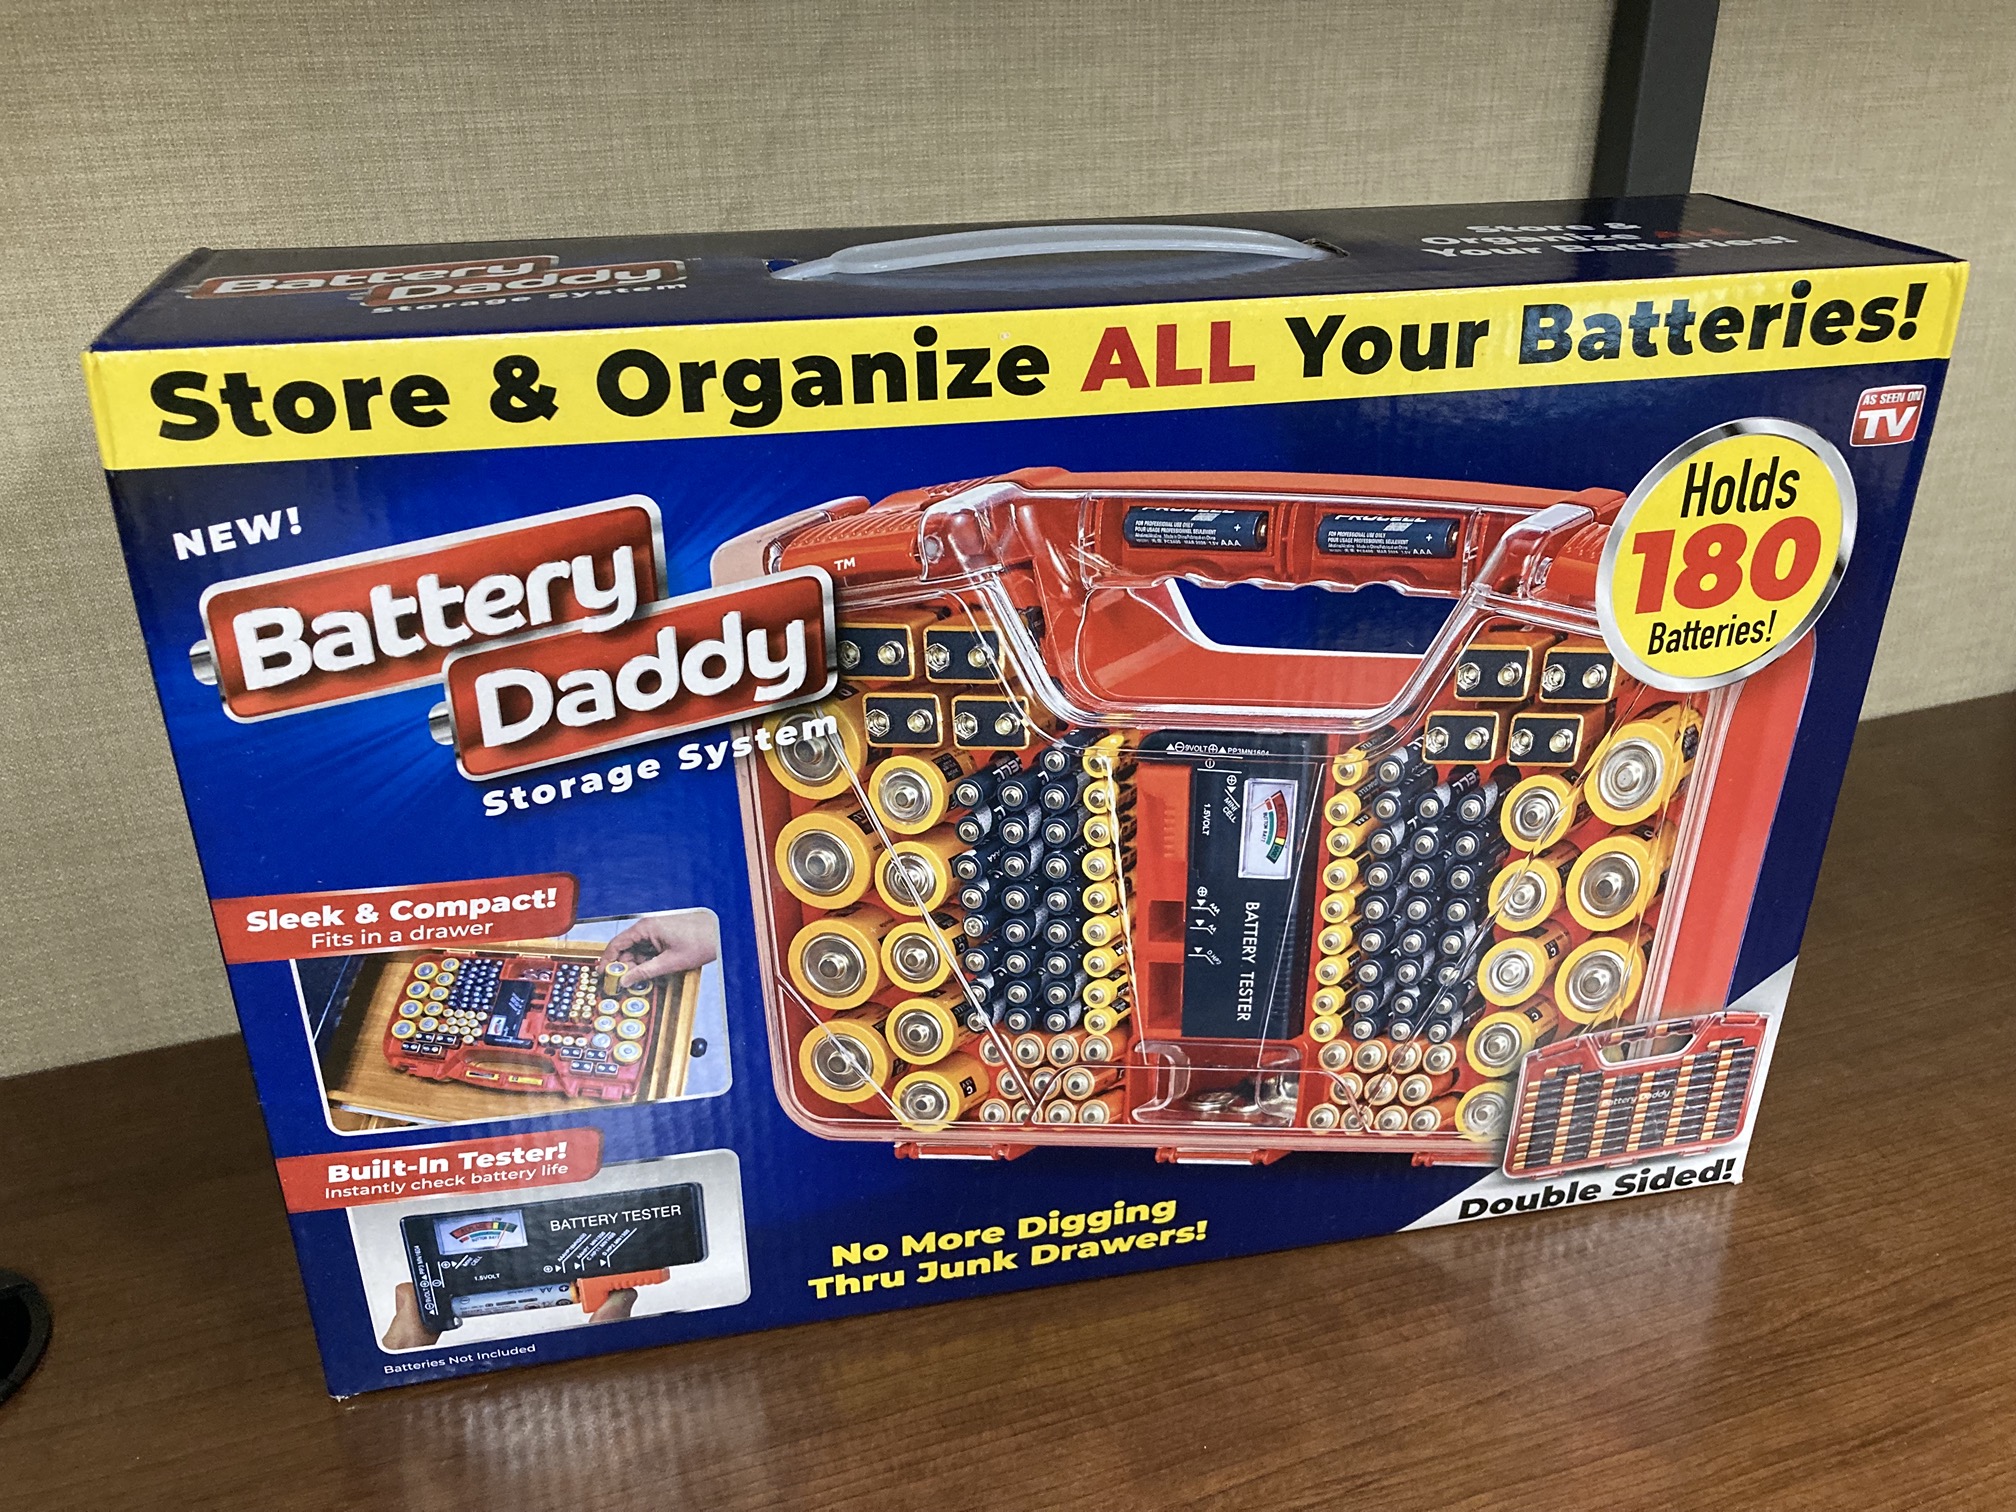 Organizing Batteries with a Battery Daddy – Press Any Key